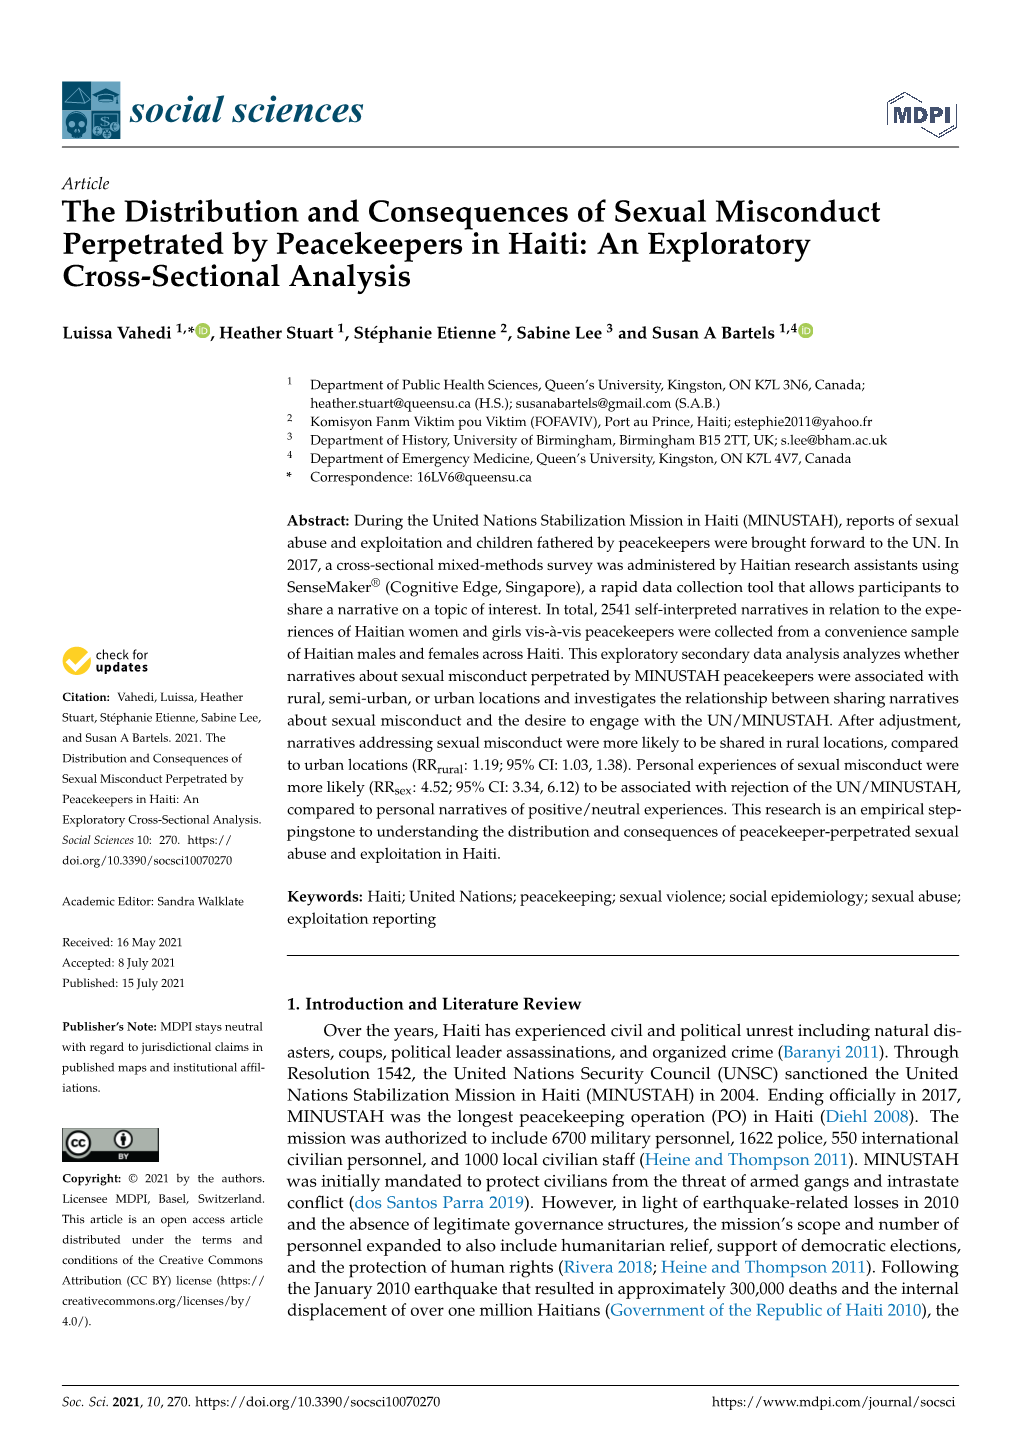 The Distribution and Consequences of Sexual Misconduct Perpetrated by Peacekeepers in Haiti: an Exploratory Cross-Sectional Analysis